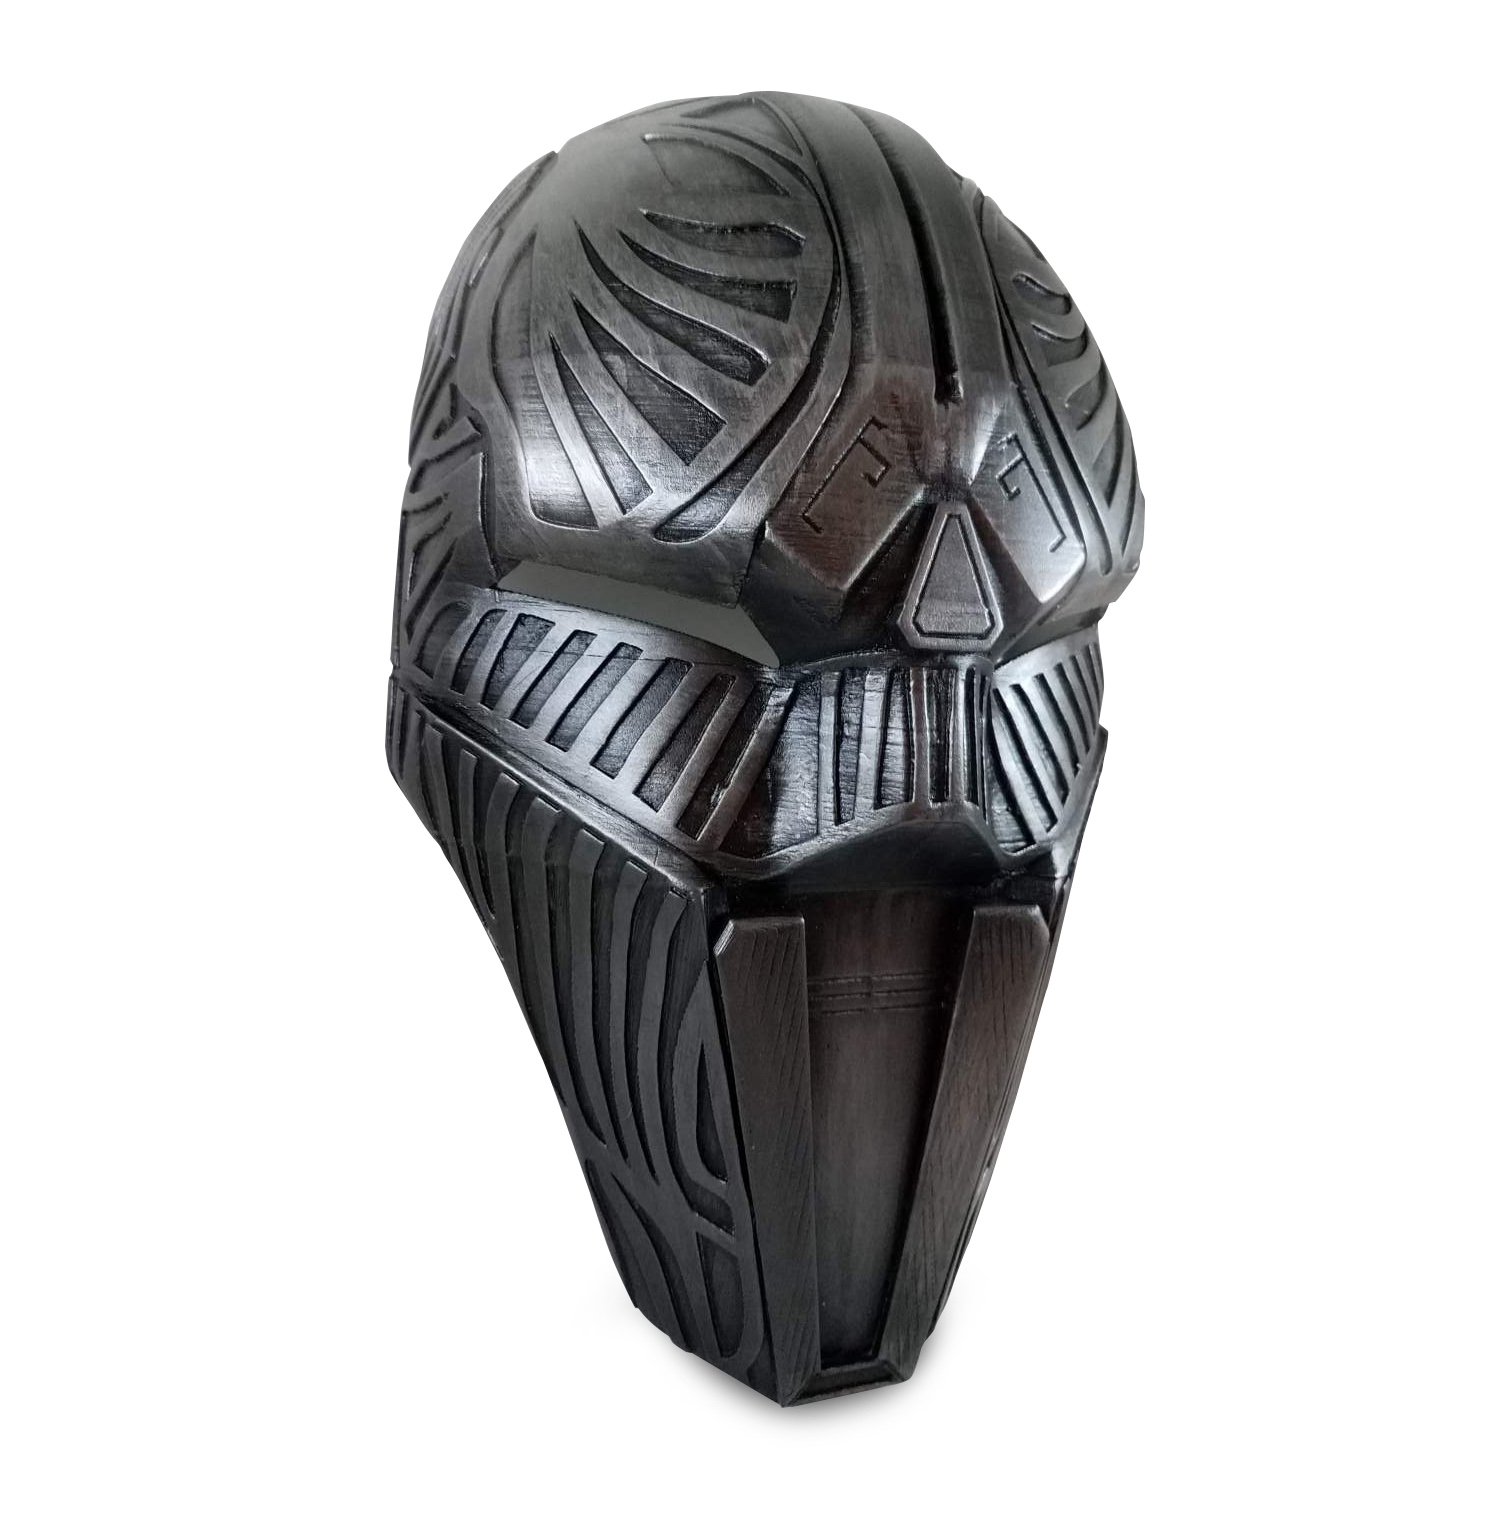 Sith Acolyte Mask (Star Wars)